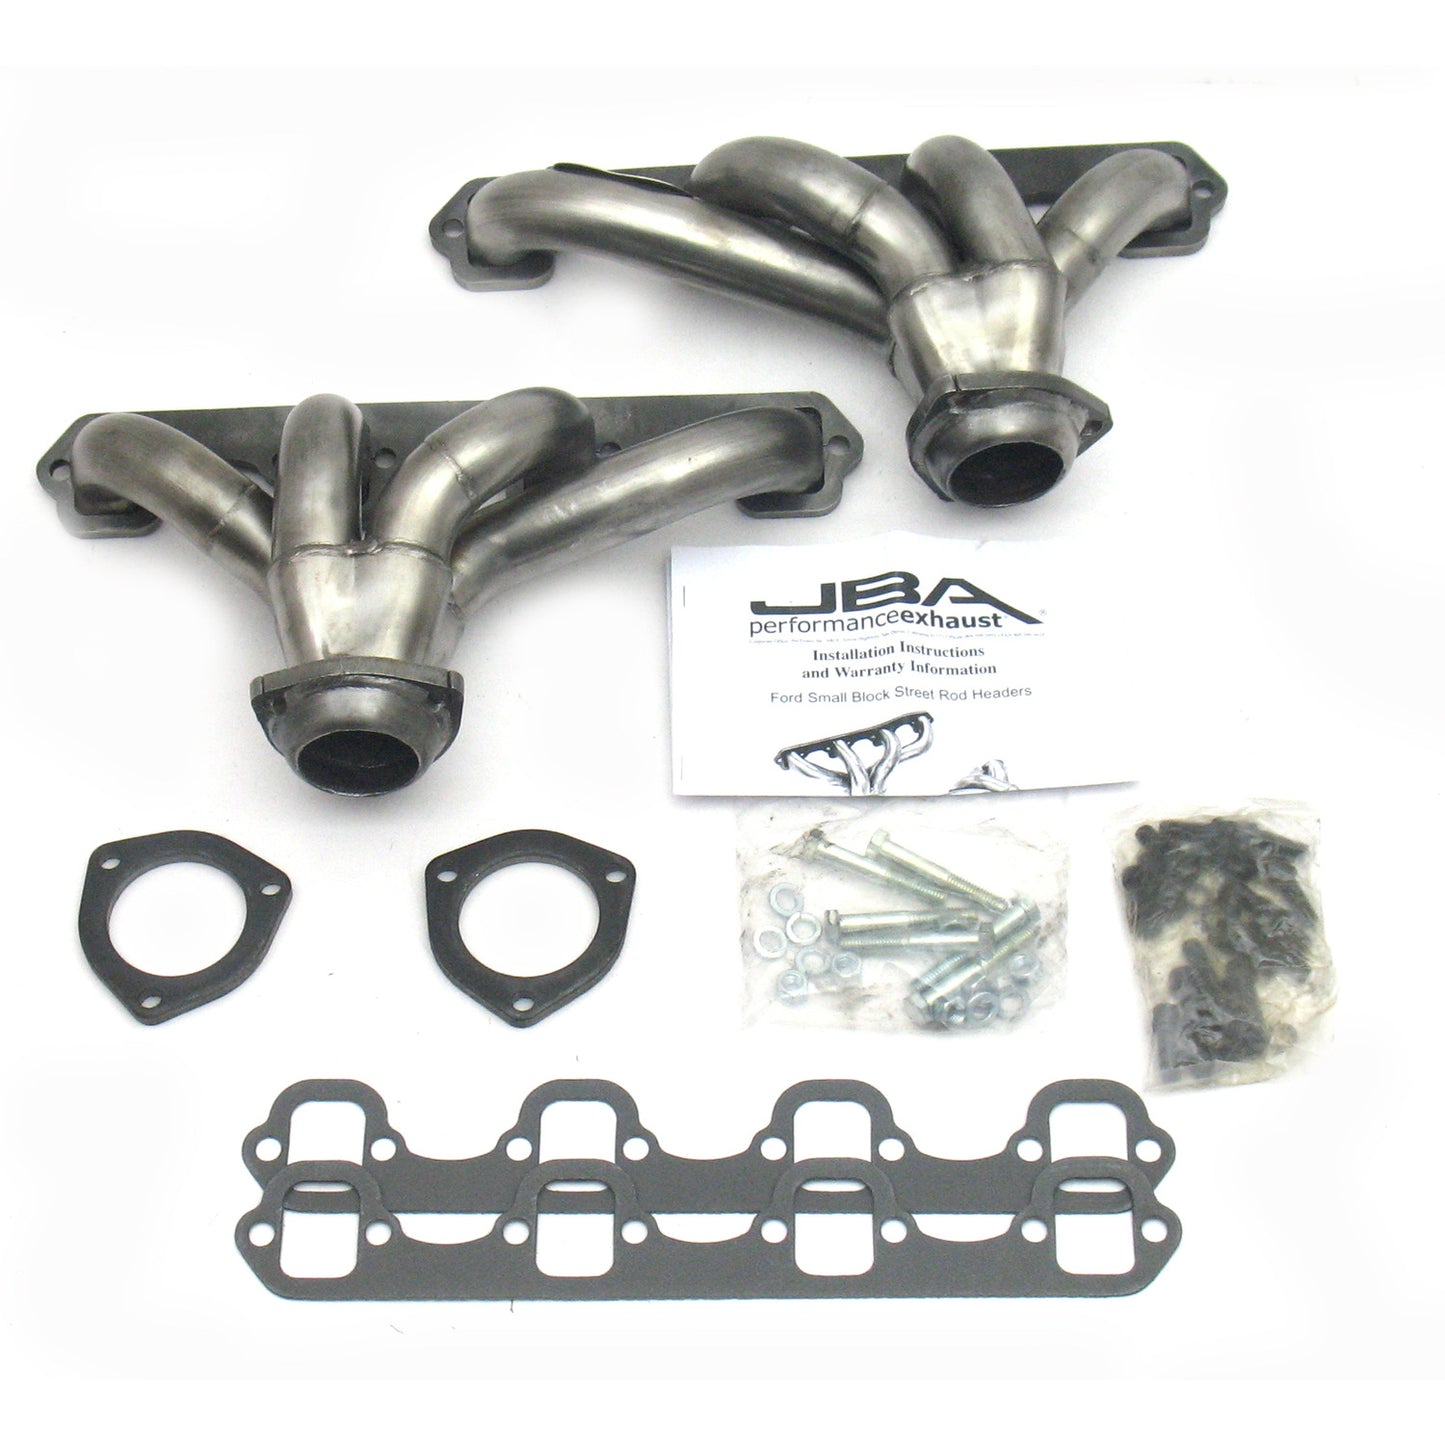 JBA Performance Exhaust 1615S 1 1/2" Header Shorty Stainless Steel Small Block Ford Universal 289/302/351